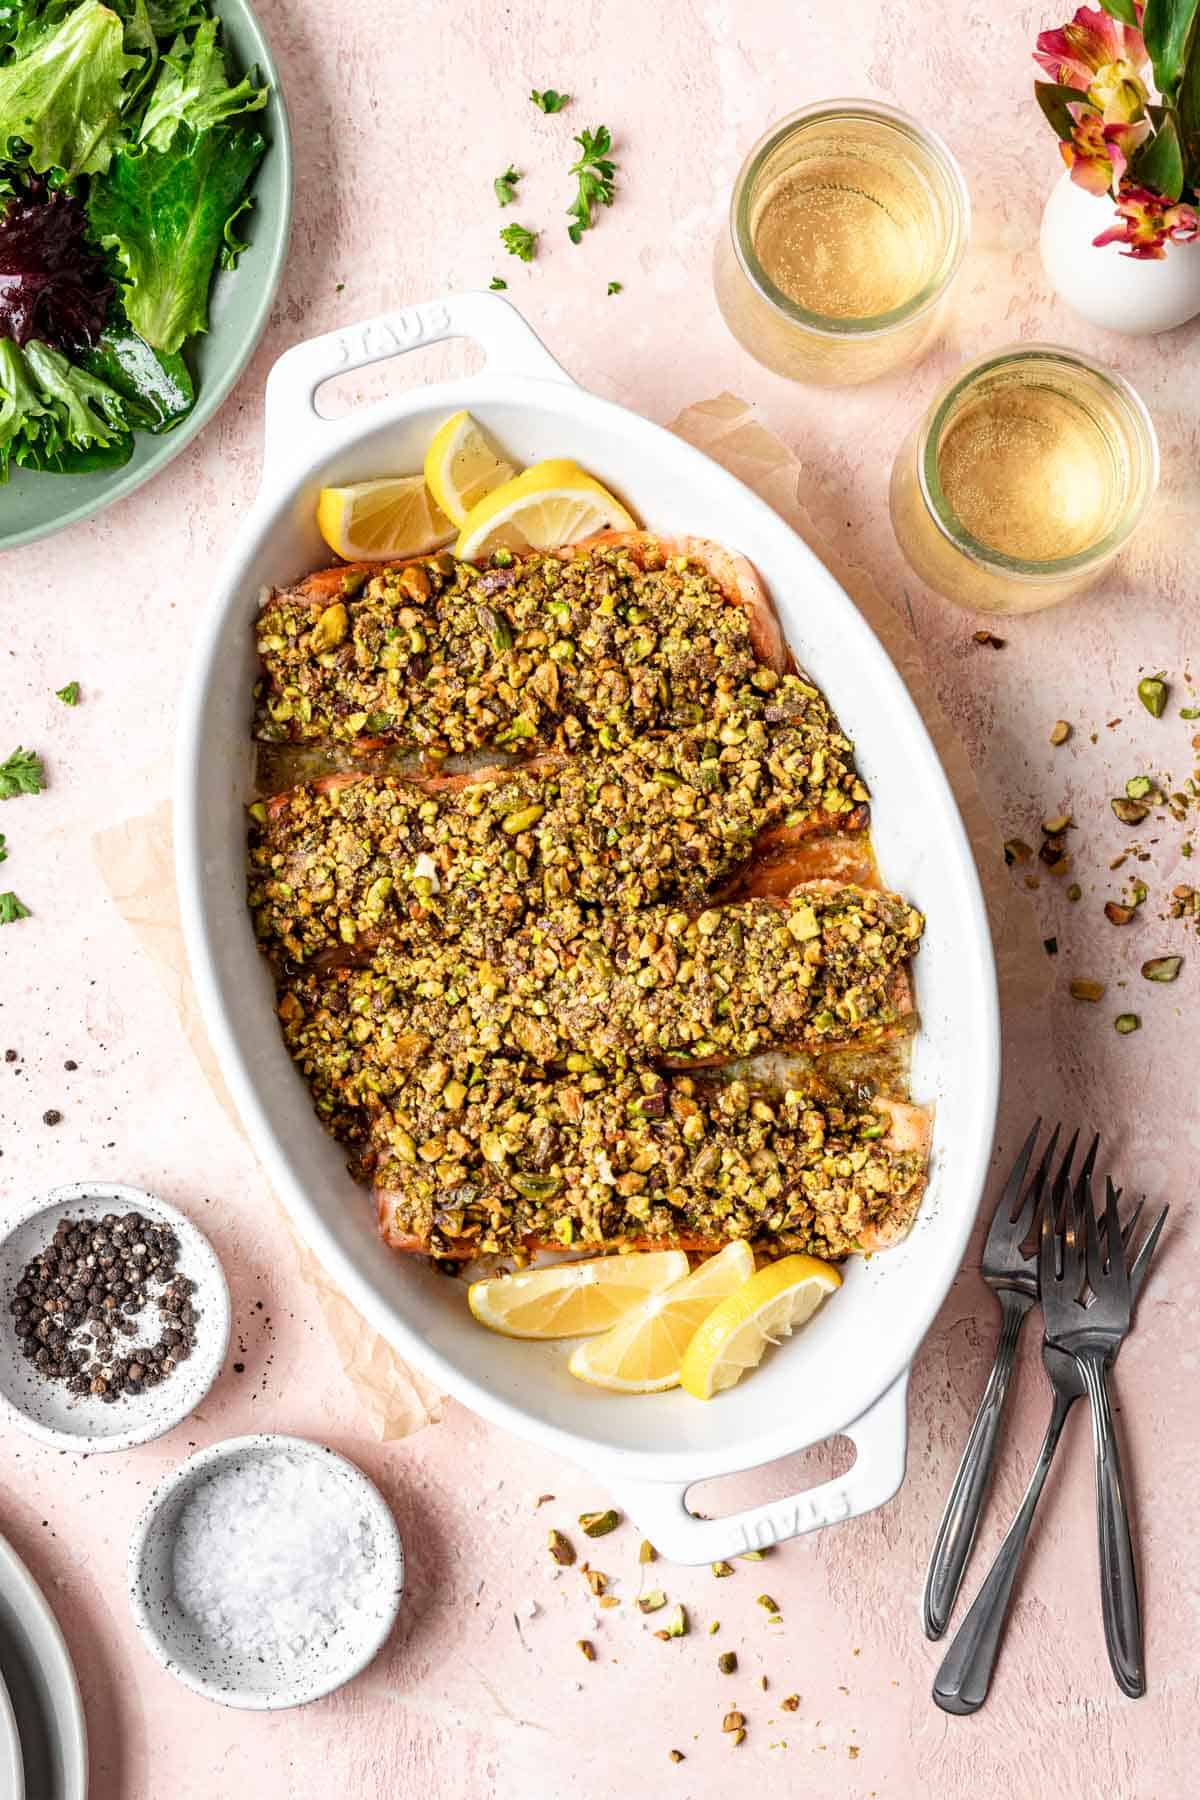 4 filets of pistachio crusted salmon in a white baking dish with lemon wedges.